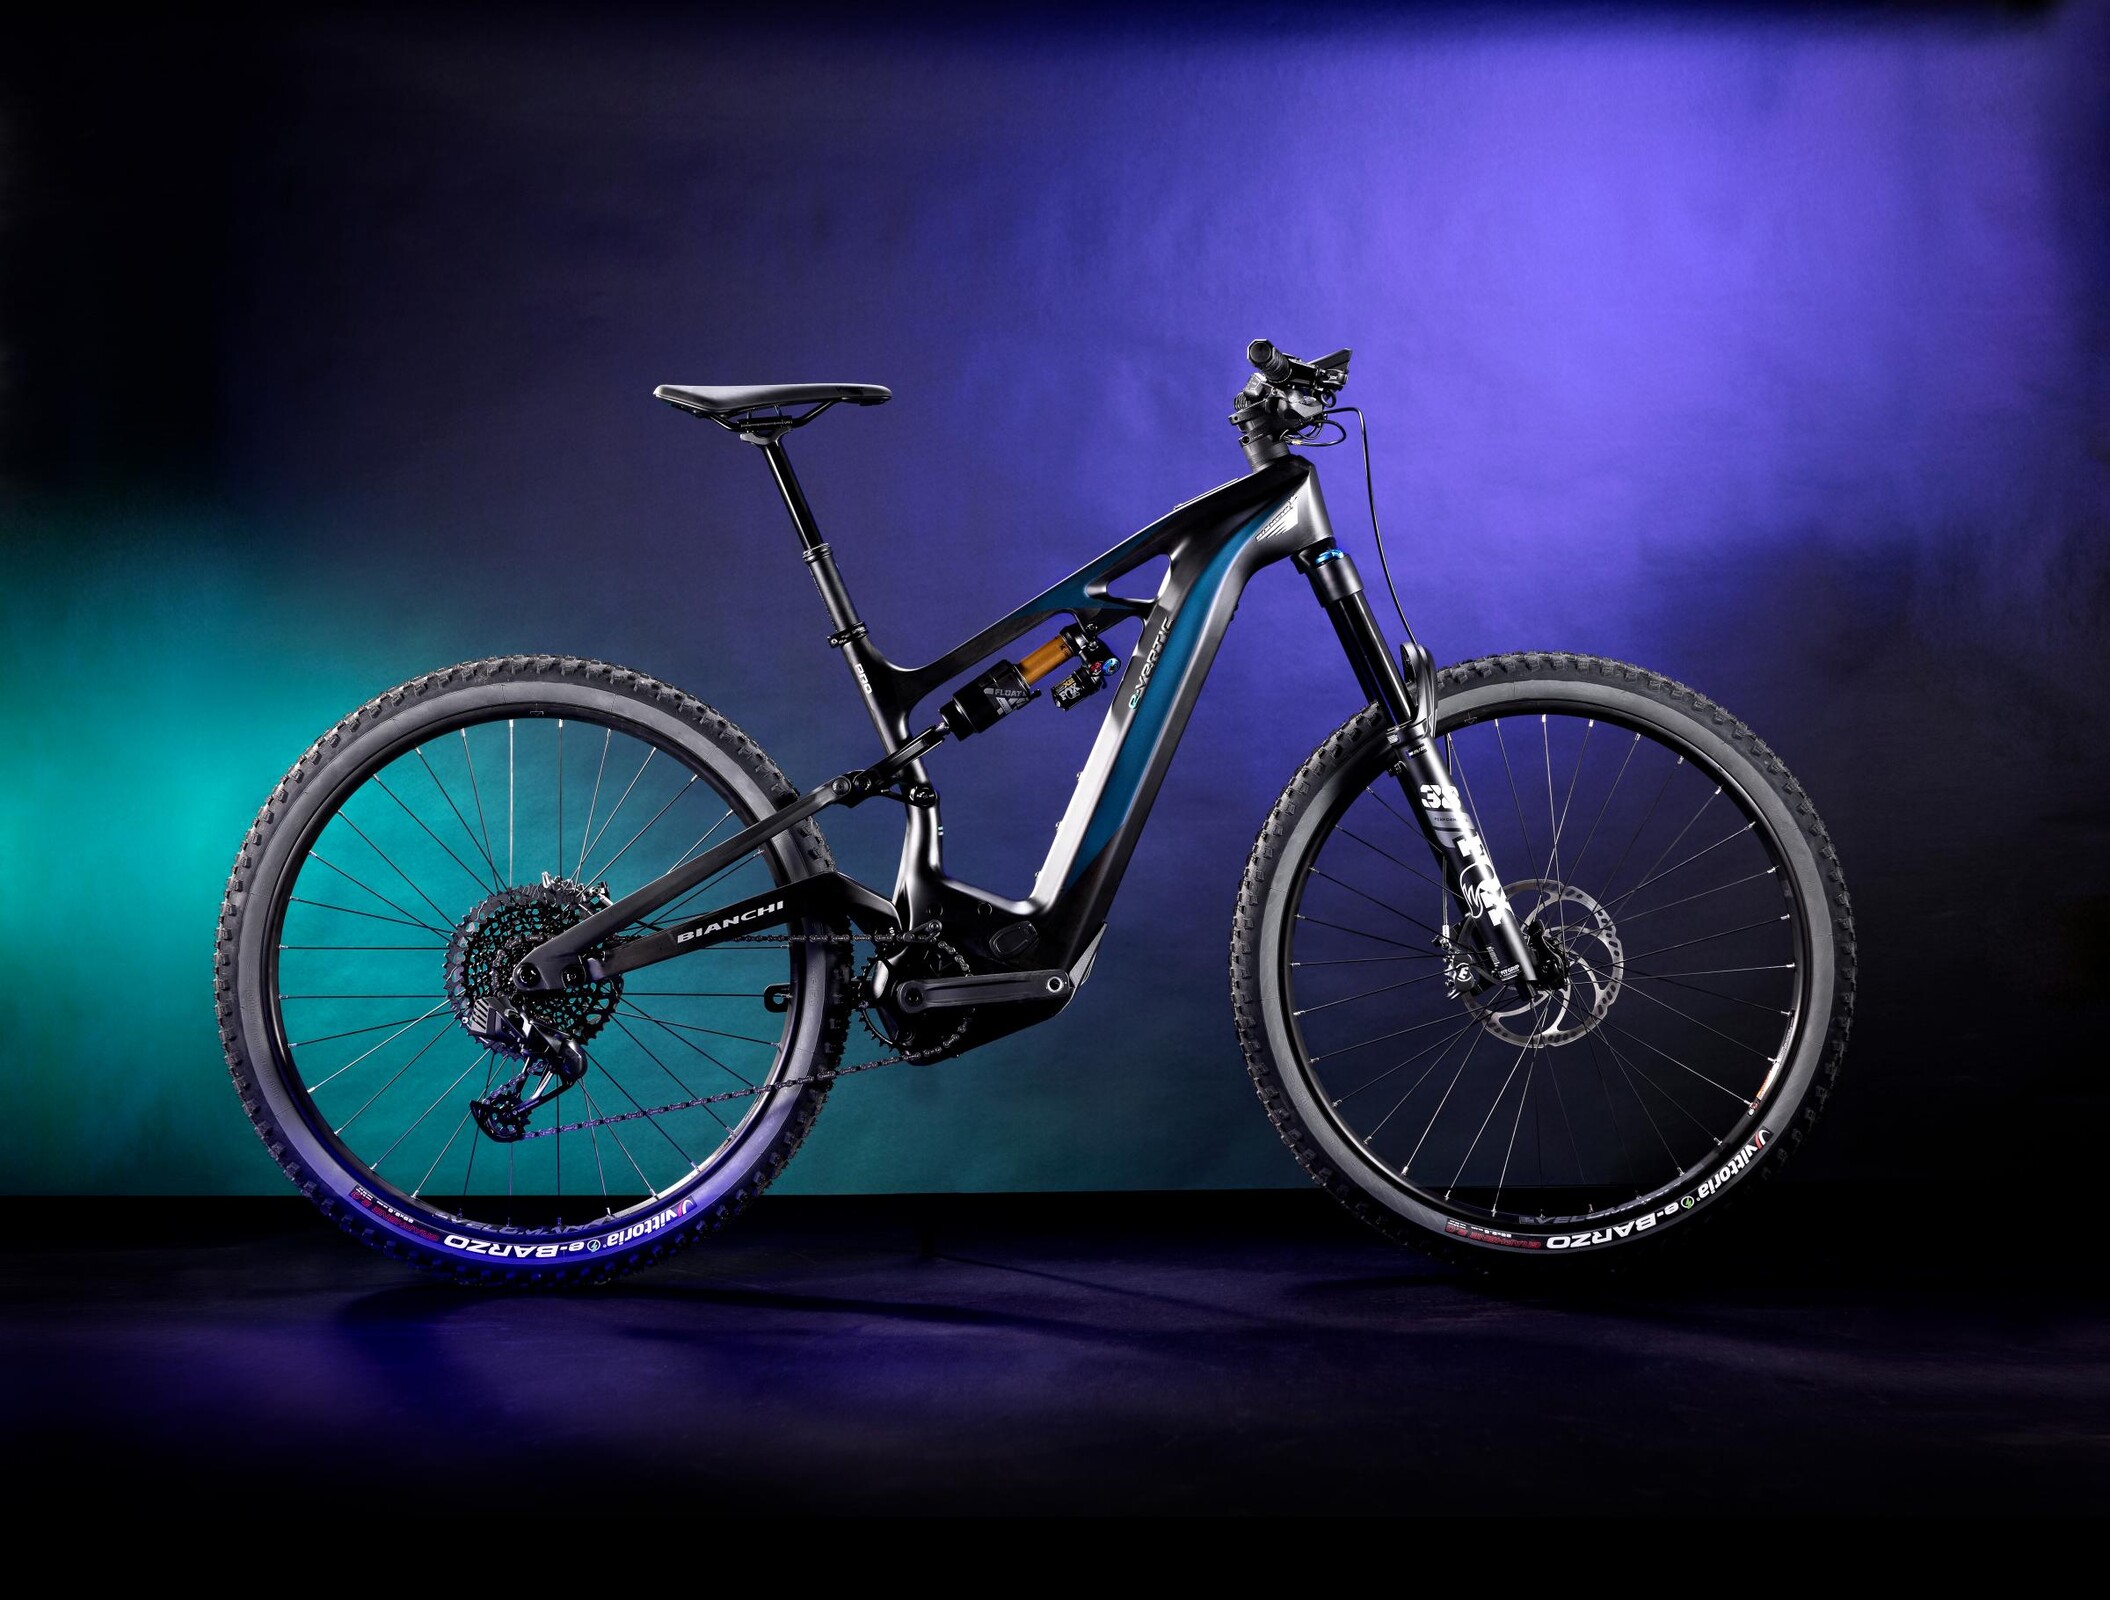 Bianchi e-Vertic: Legendary Italian bicycle maker shows off new electric  city and mountain bikes  News